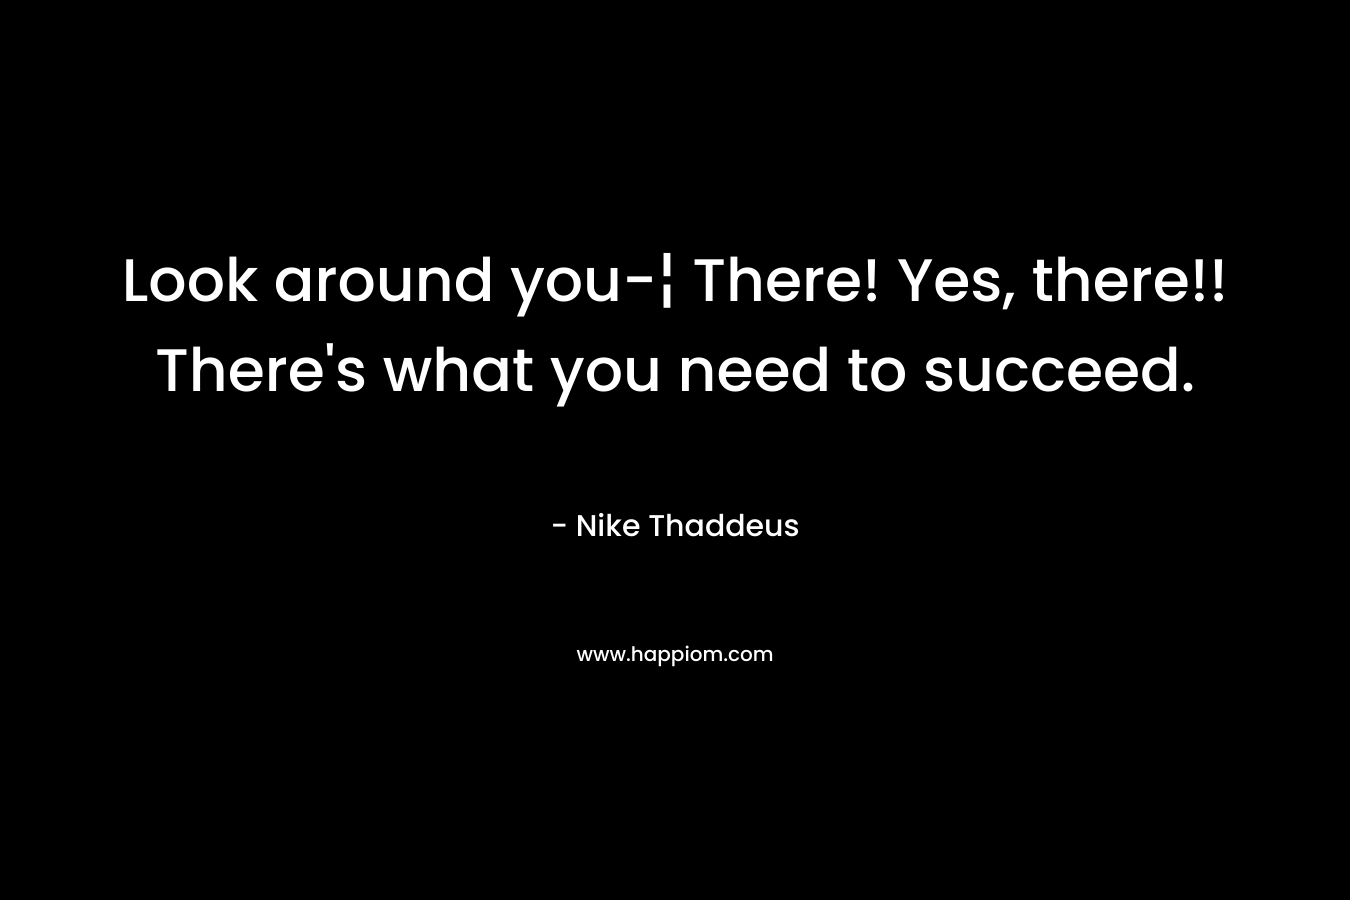 Look around you-¦ There! Yes, there!! There's what you need to succeed.